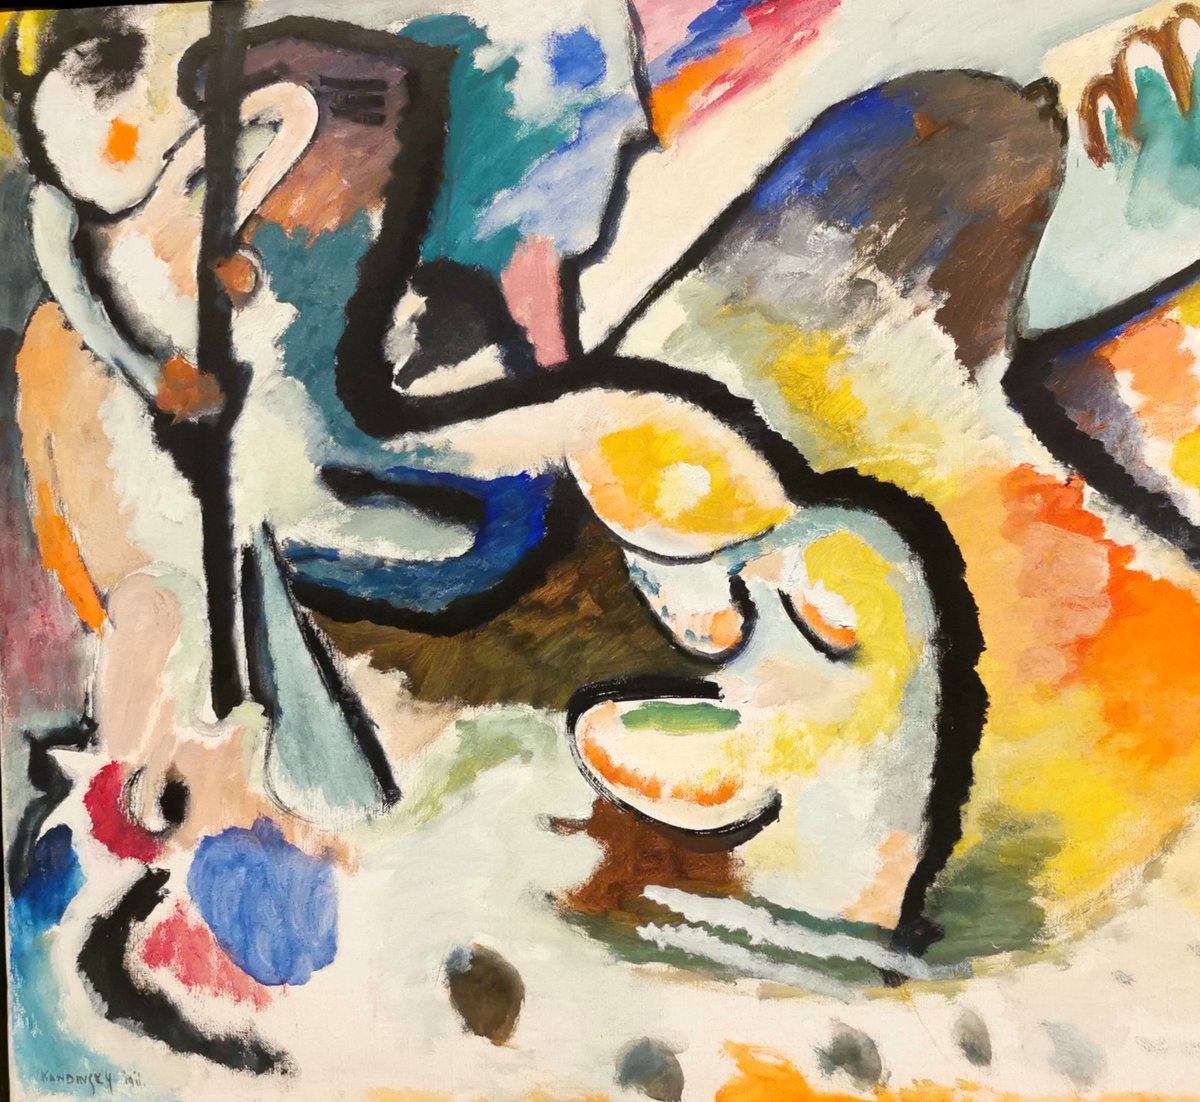 #Expressionists @Tate  is a story of friendships through The Blue Rider's #art - from F Marc’s interest in colour to A Sacharoff’s freestyle performance, from G Münter's experimental photographs to M Werefkin's dramatic paintings. Bonus encountering @StEdmundHall friend.